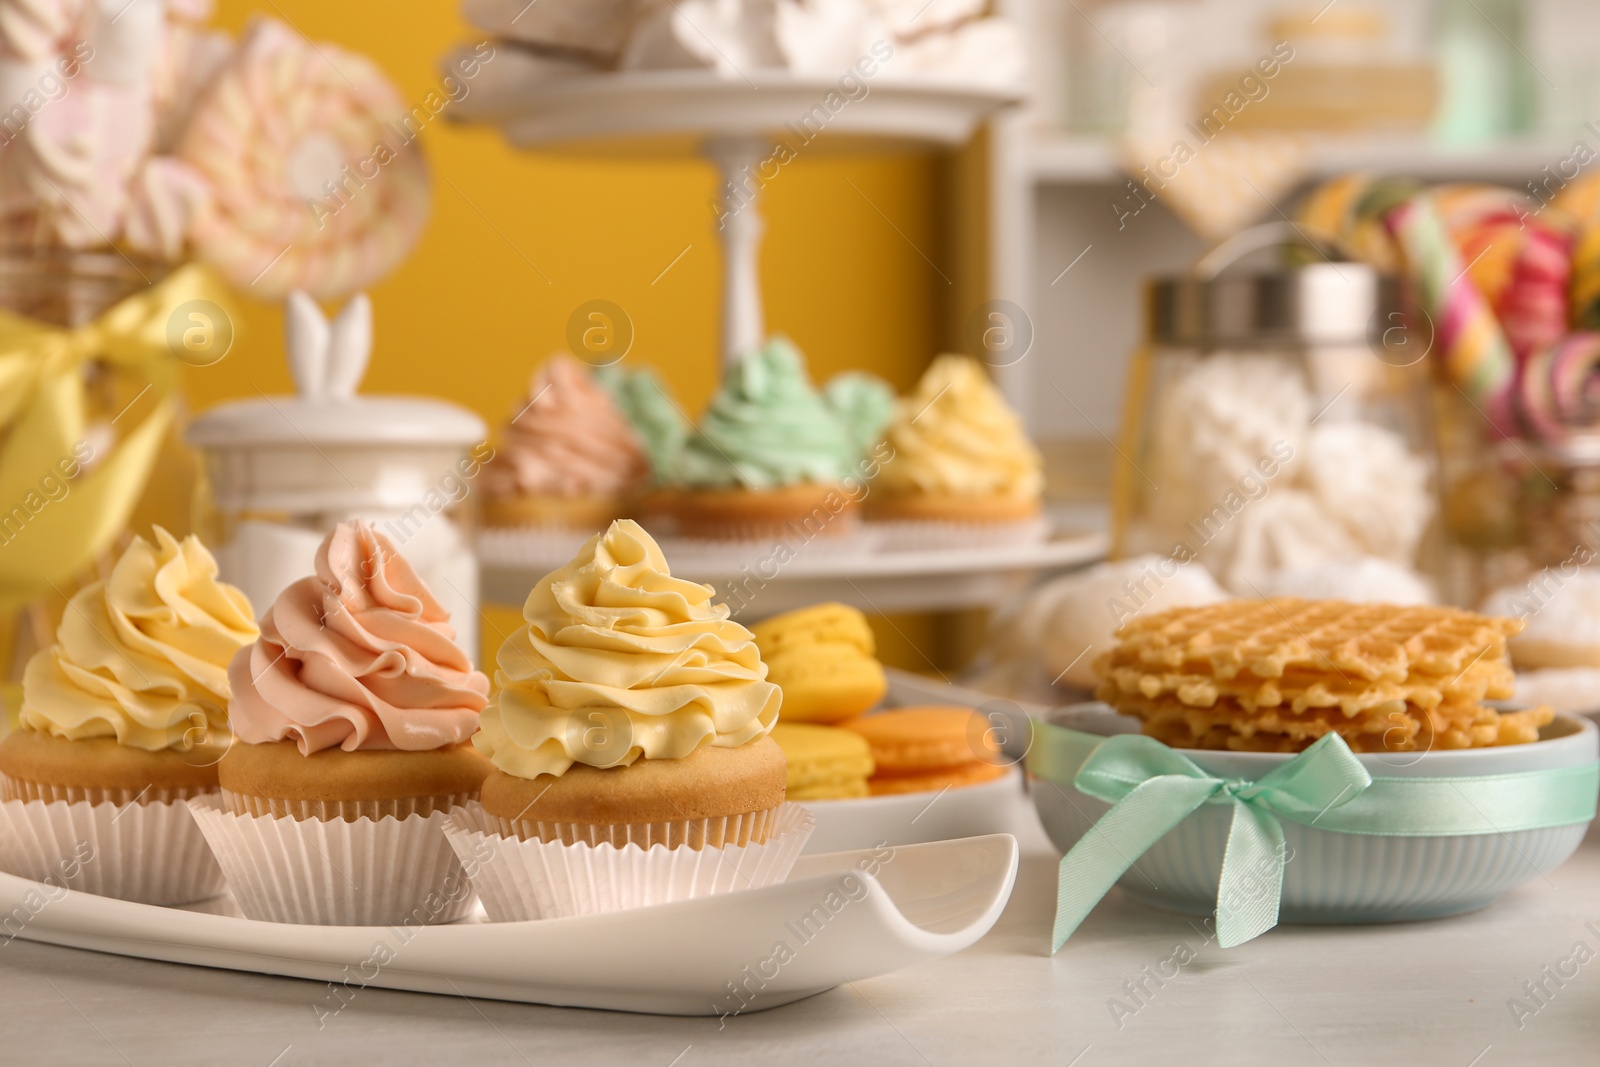 Photo of Tasty cupcakes and other sweets on table. Candy bar, closeup view